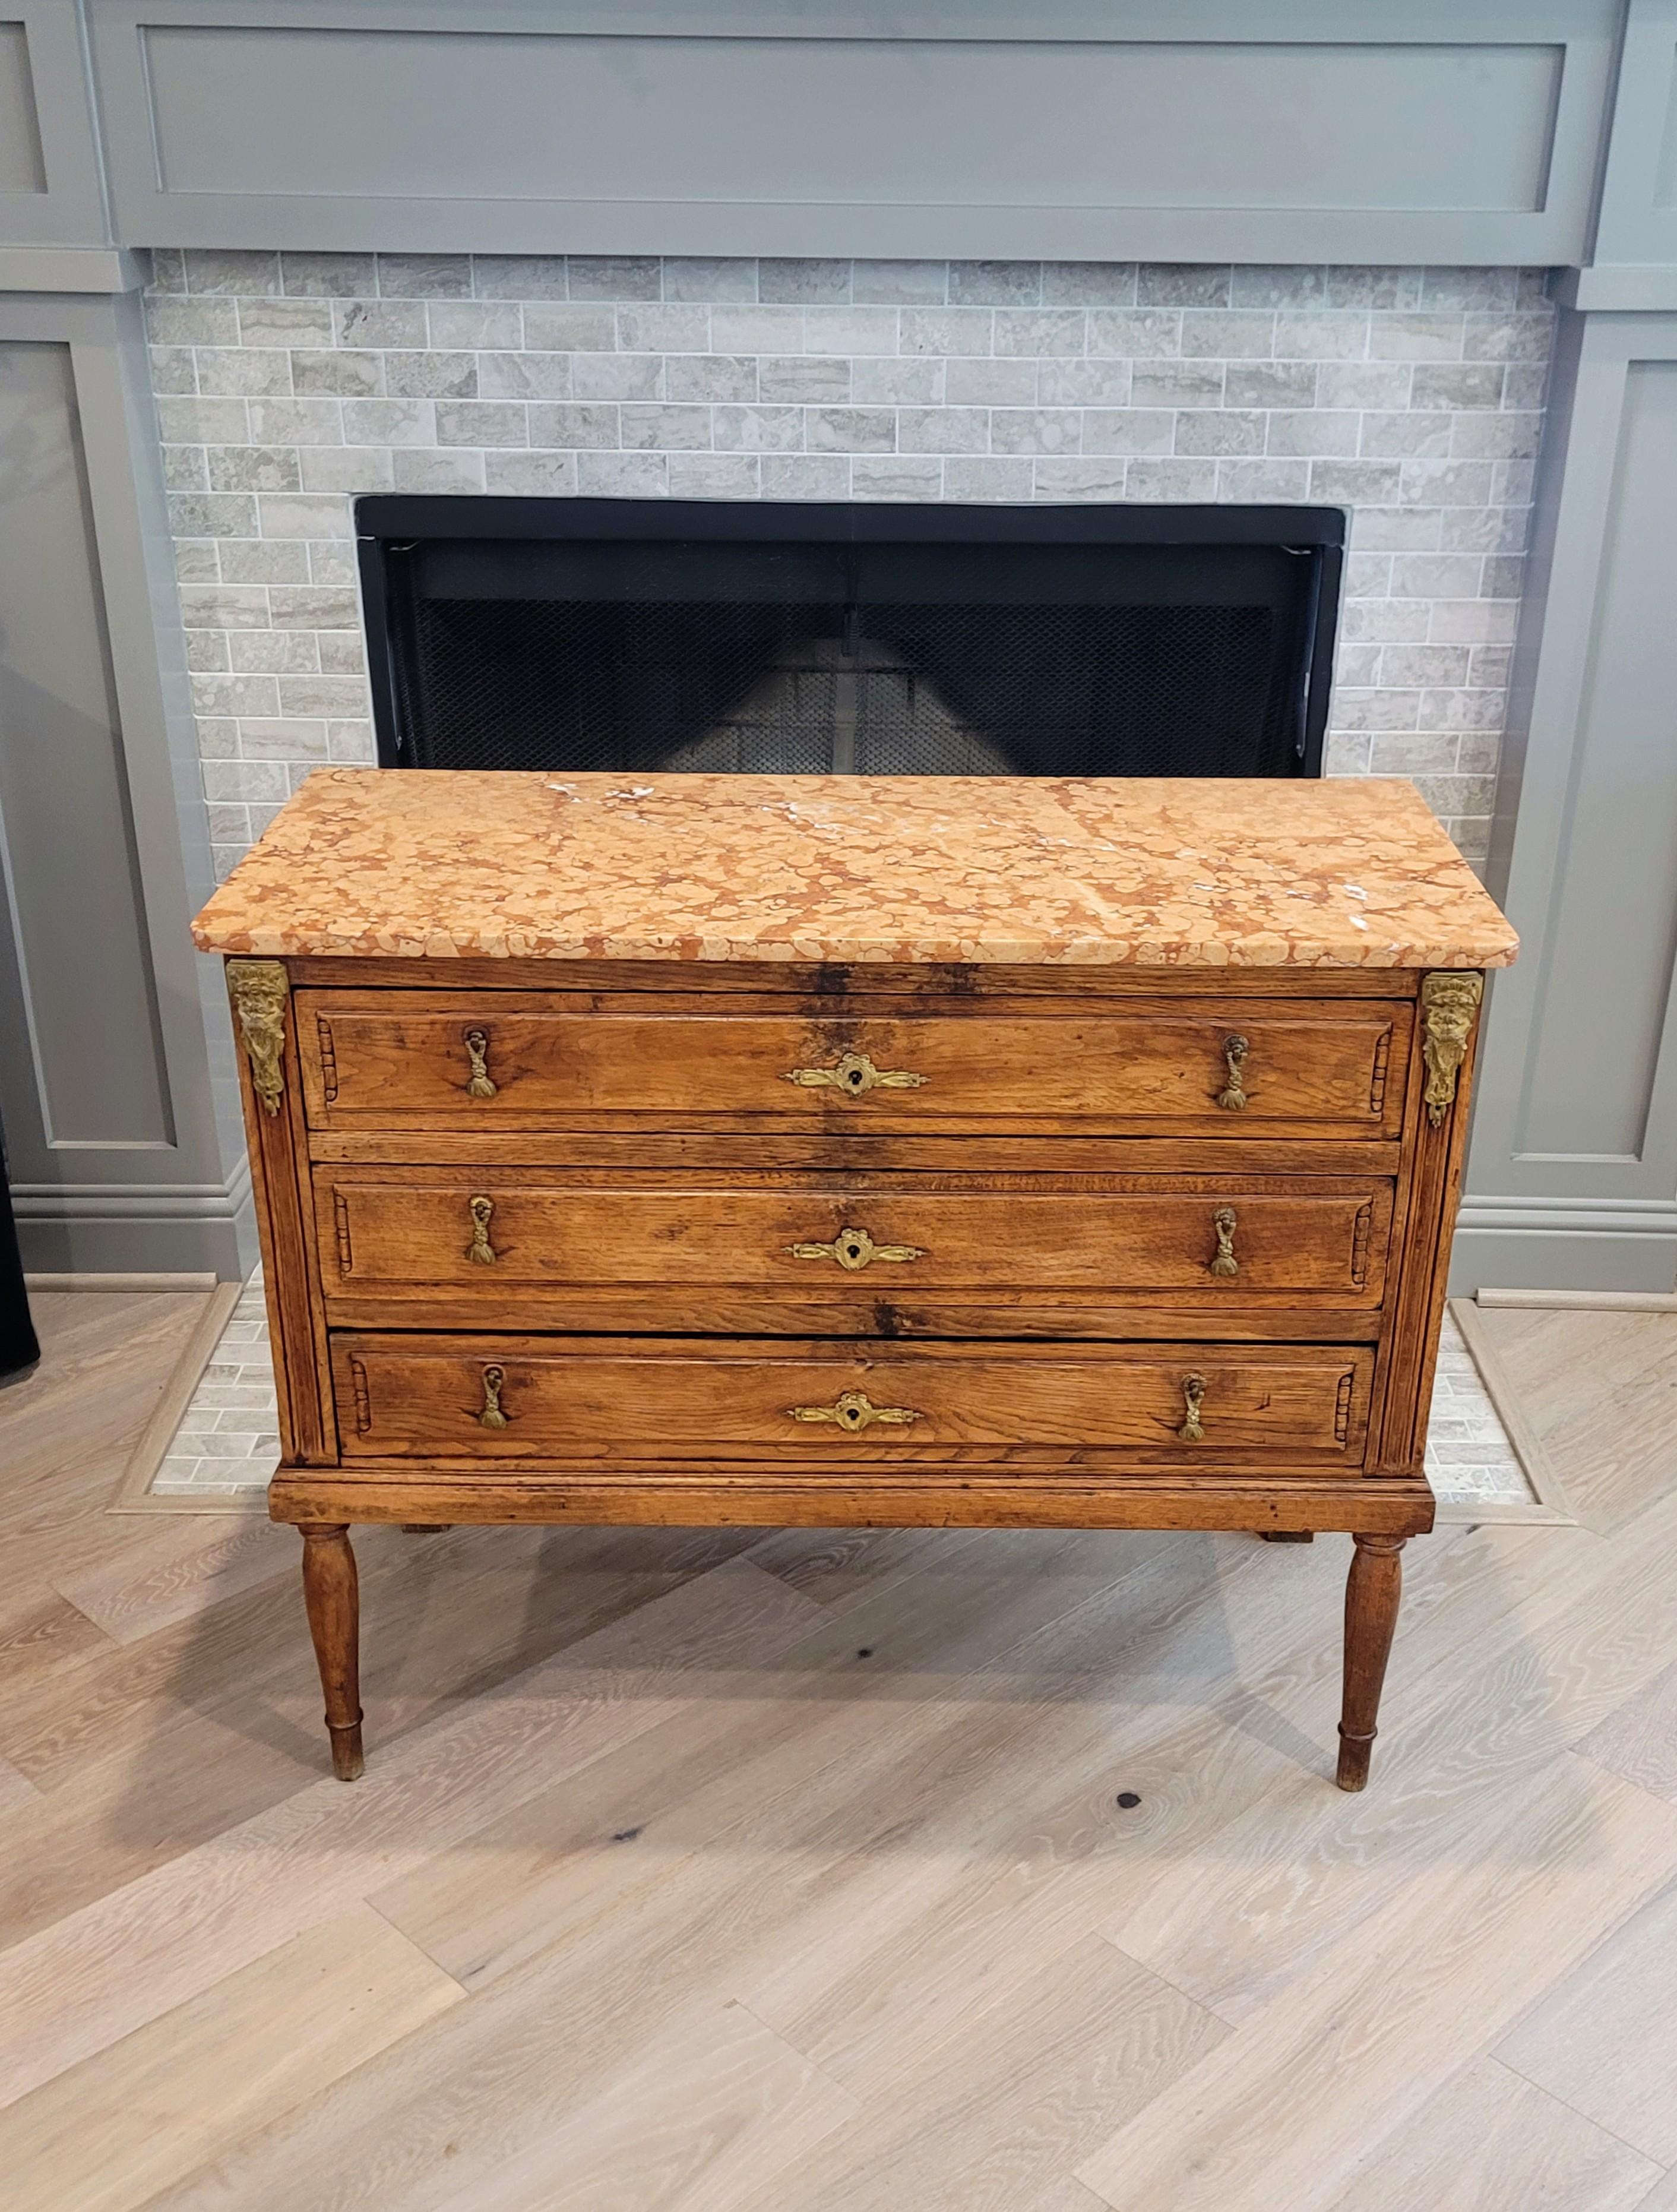 Refined elegant simplicity, comfortable rustic warmth and historical European old world charm. 

A handsome antique, circa 1800, country French marble-topped ormolu mounted oak chest of drawers commode with outstanding patina.

Born in Provincial